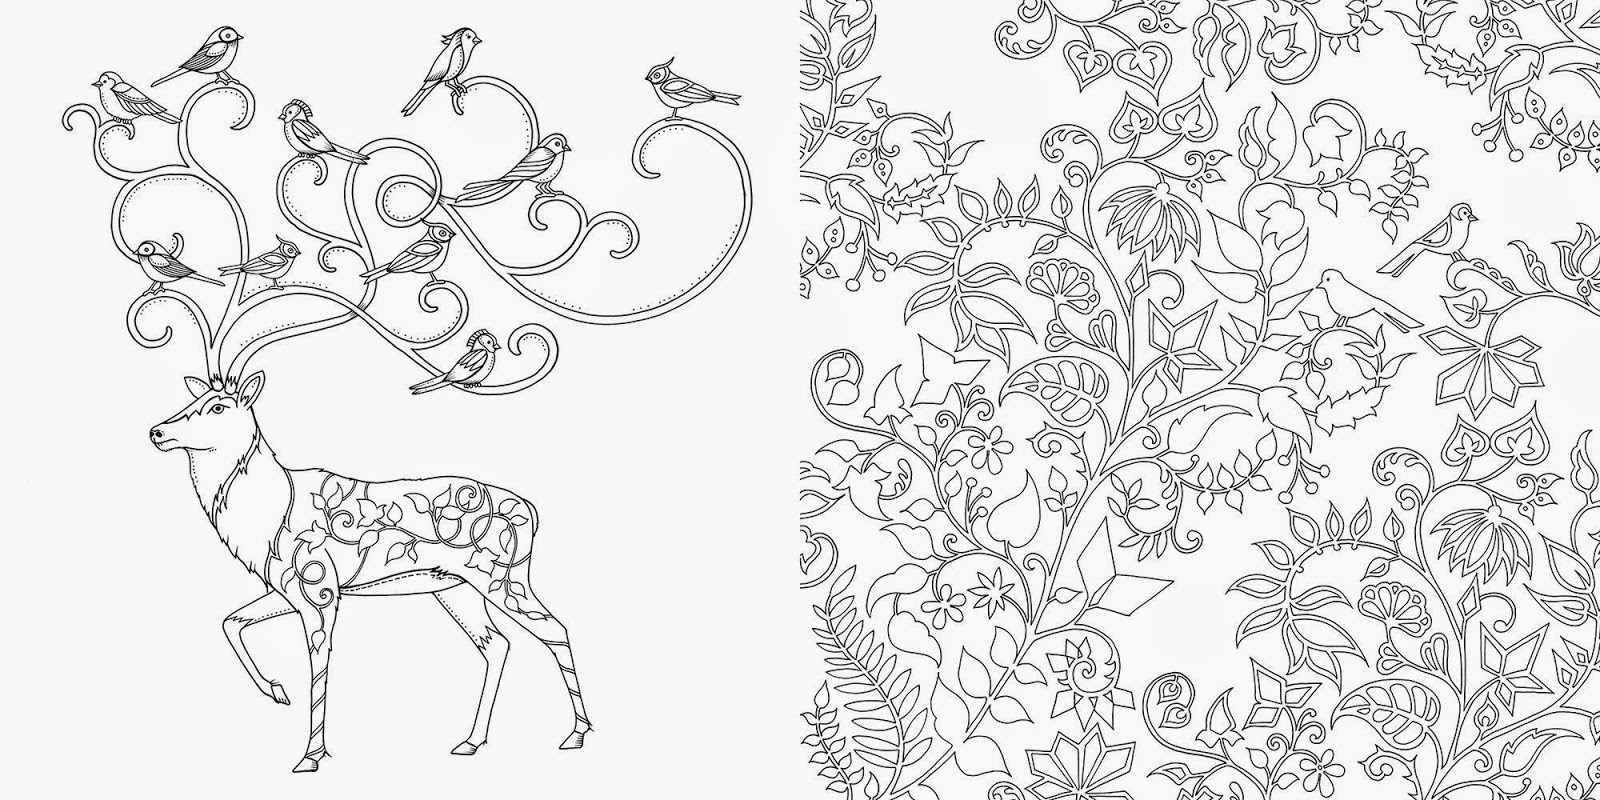 Enchanted Forest Adult Coloring Book
 SurLaLune Fairy Tales Blog Art Thursday Enchanted Forest